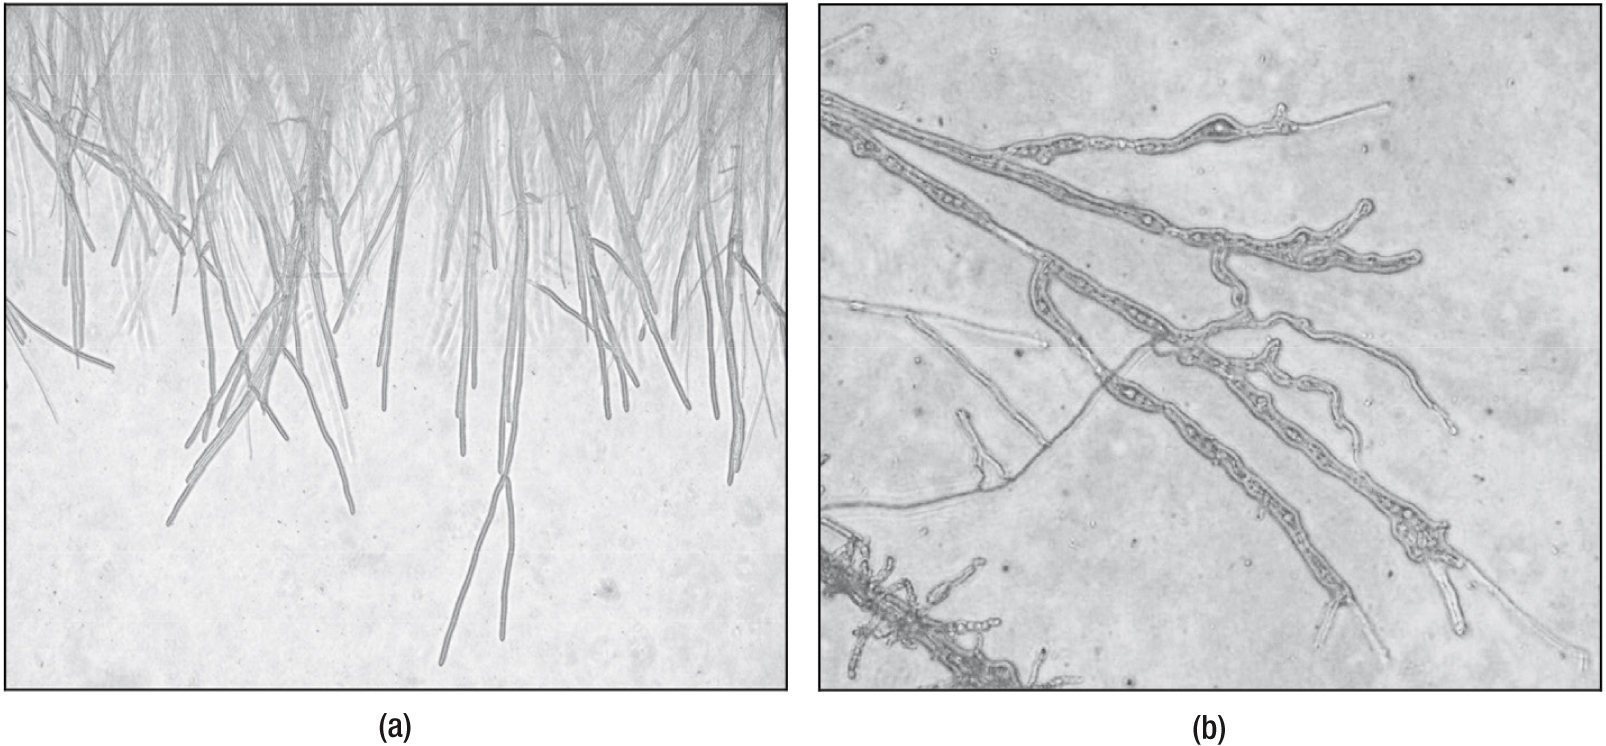 Two black and white images taken with a microscope of gray strands with light gray backgrounds. In the first image, labeled (a), a group of strands makes up the top of the frame and drips down loosely vertical, like roots. In the second image, labeled (b), one major strand branches out diagonally from the top left corner and another lumpy strand is in the bottom left corner. Inside these strands are small circular cell-like forms.